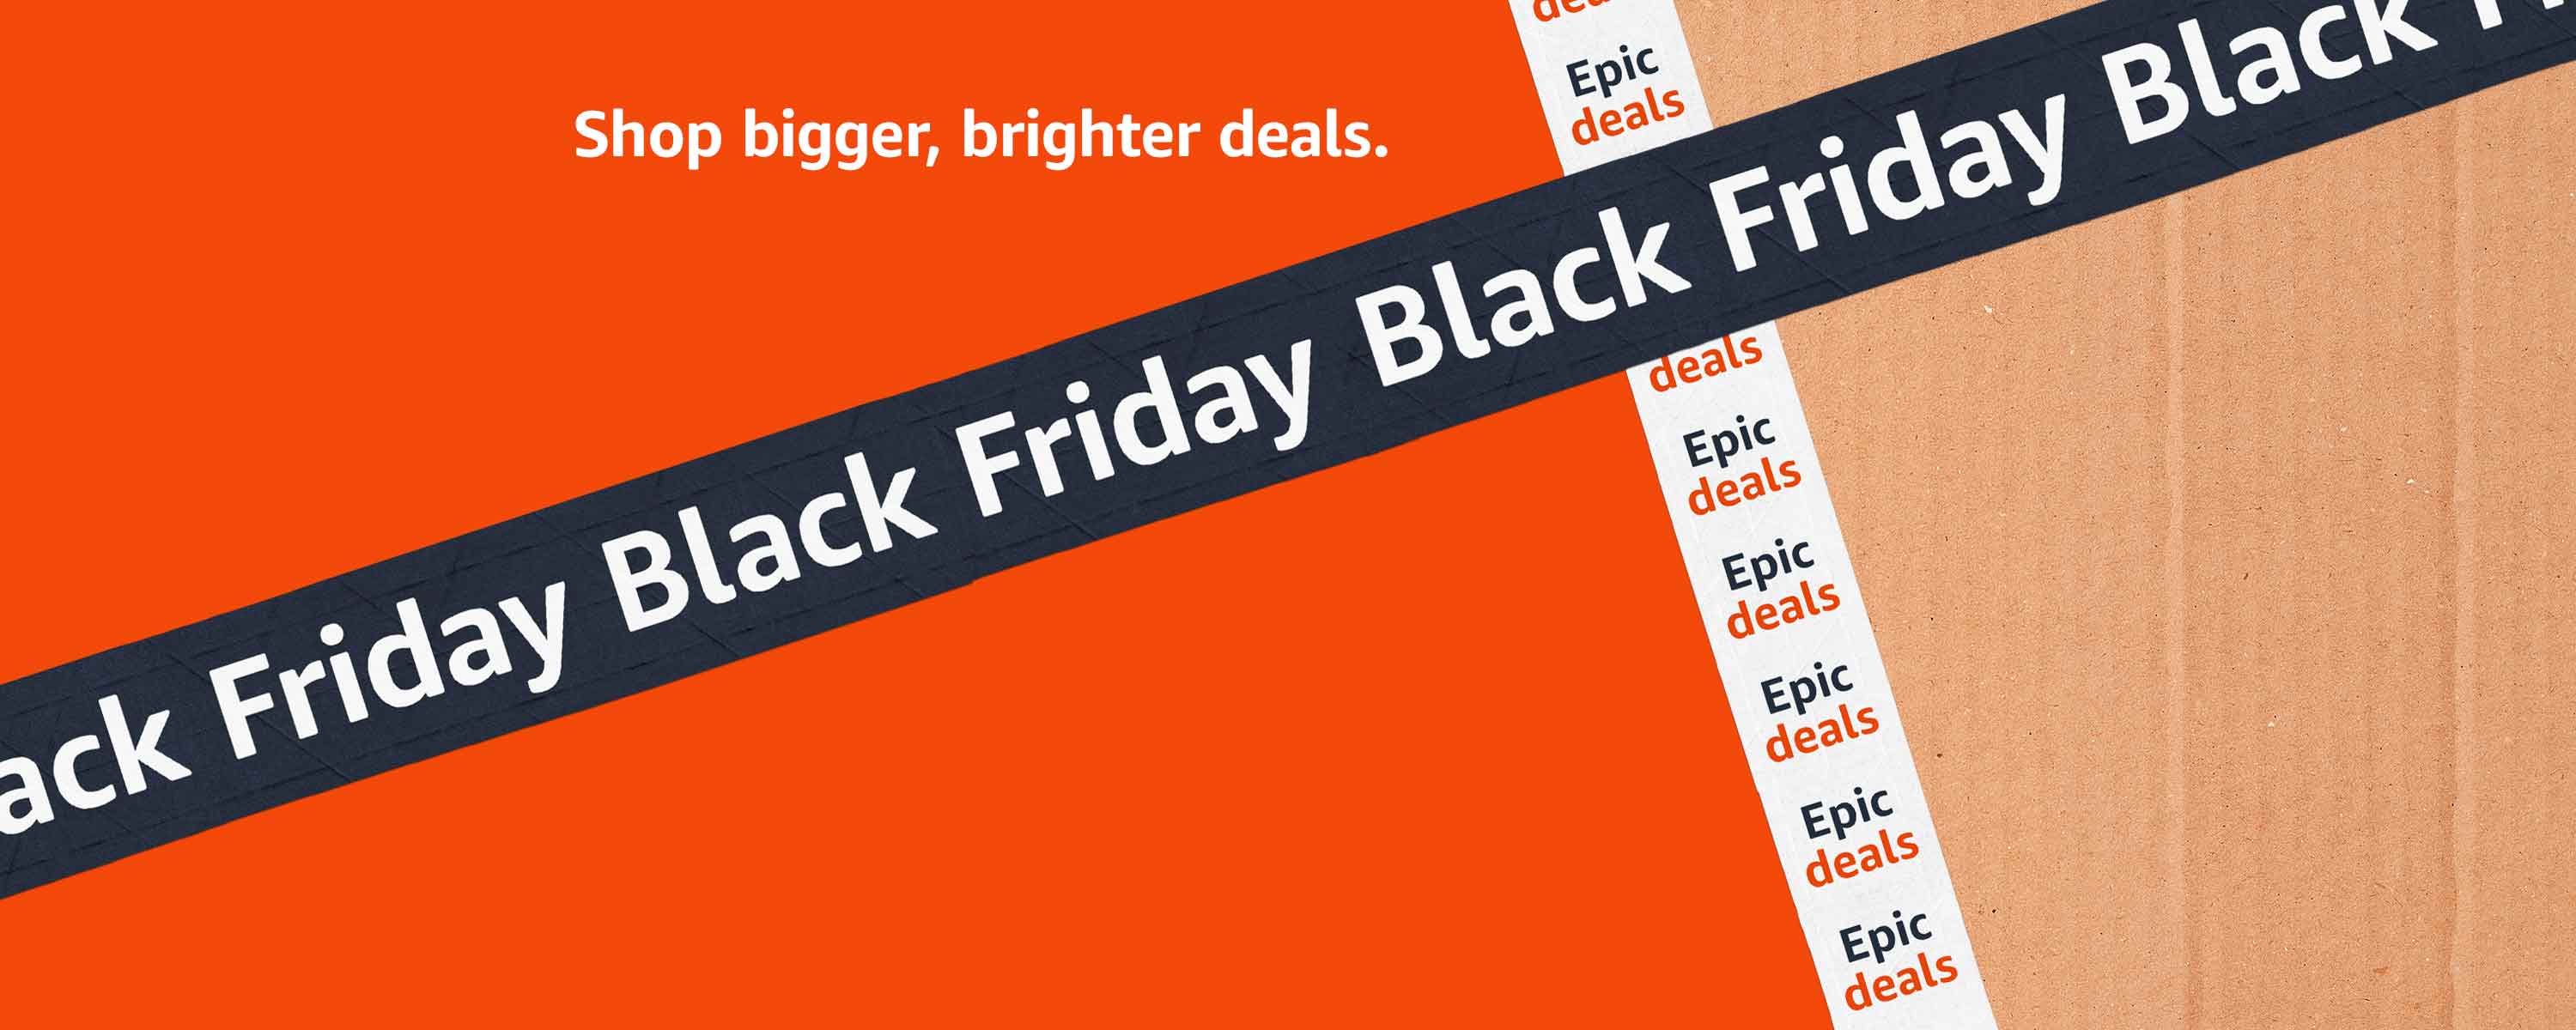 Amazon Black Friday New Deals live now plus upcoming deals